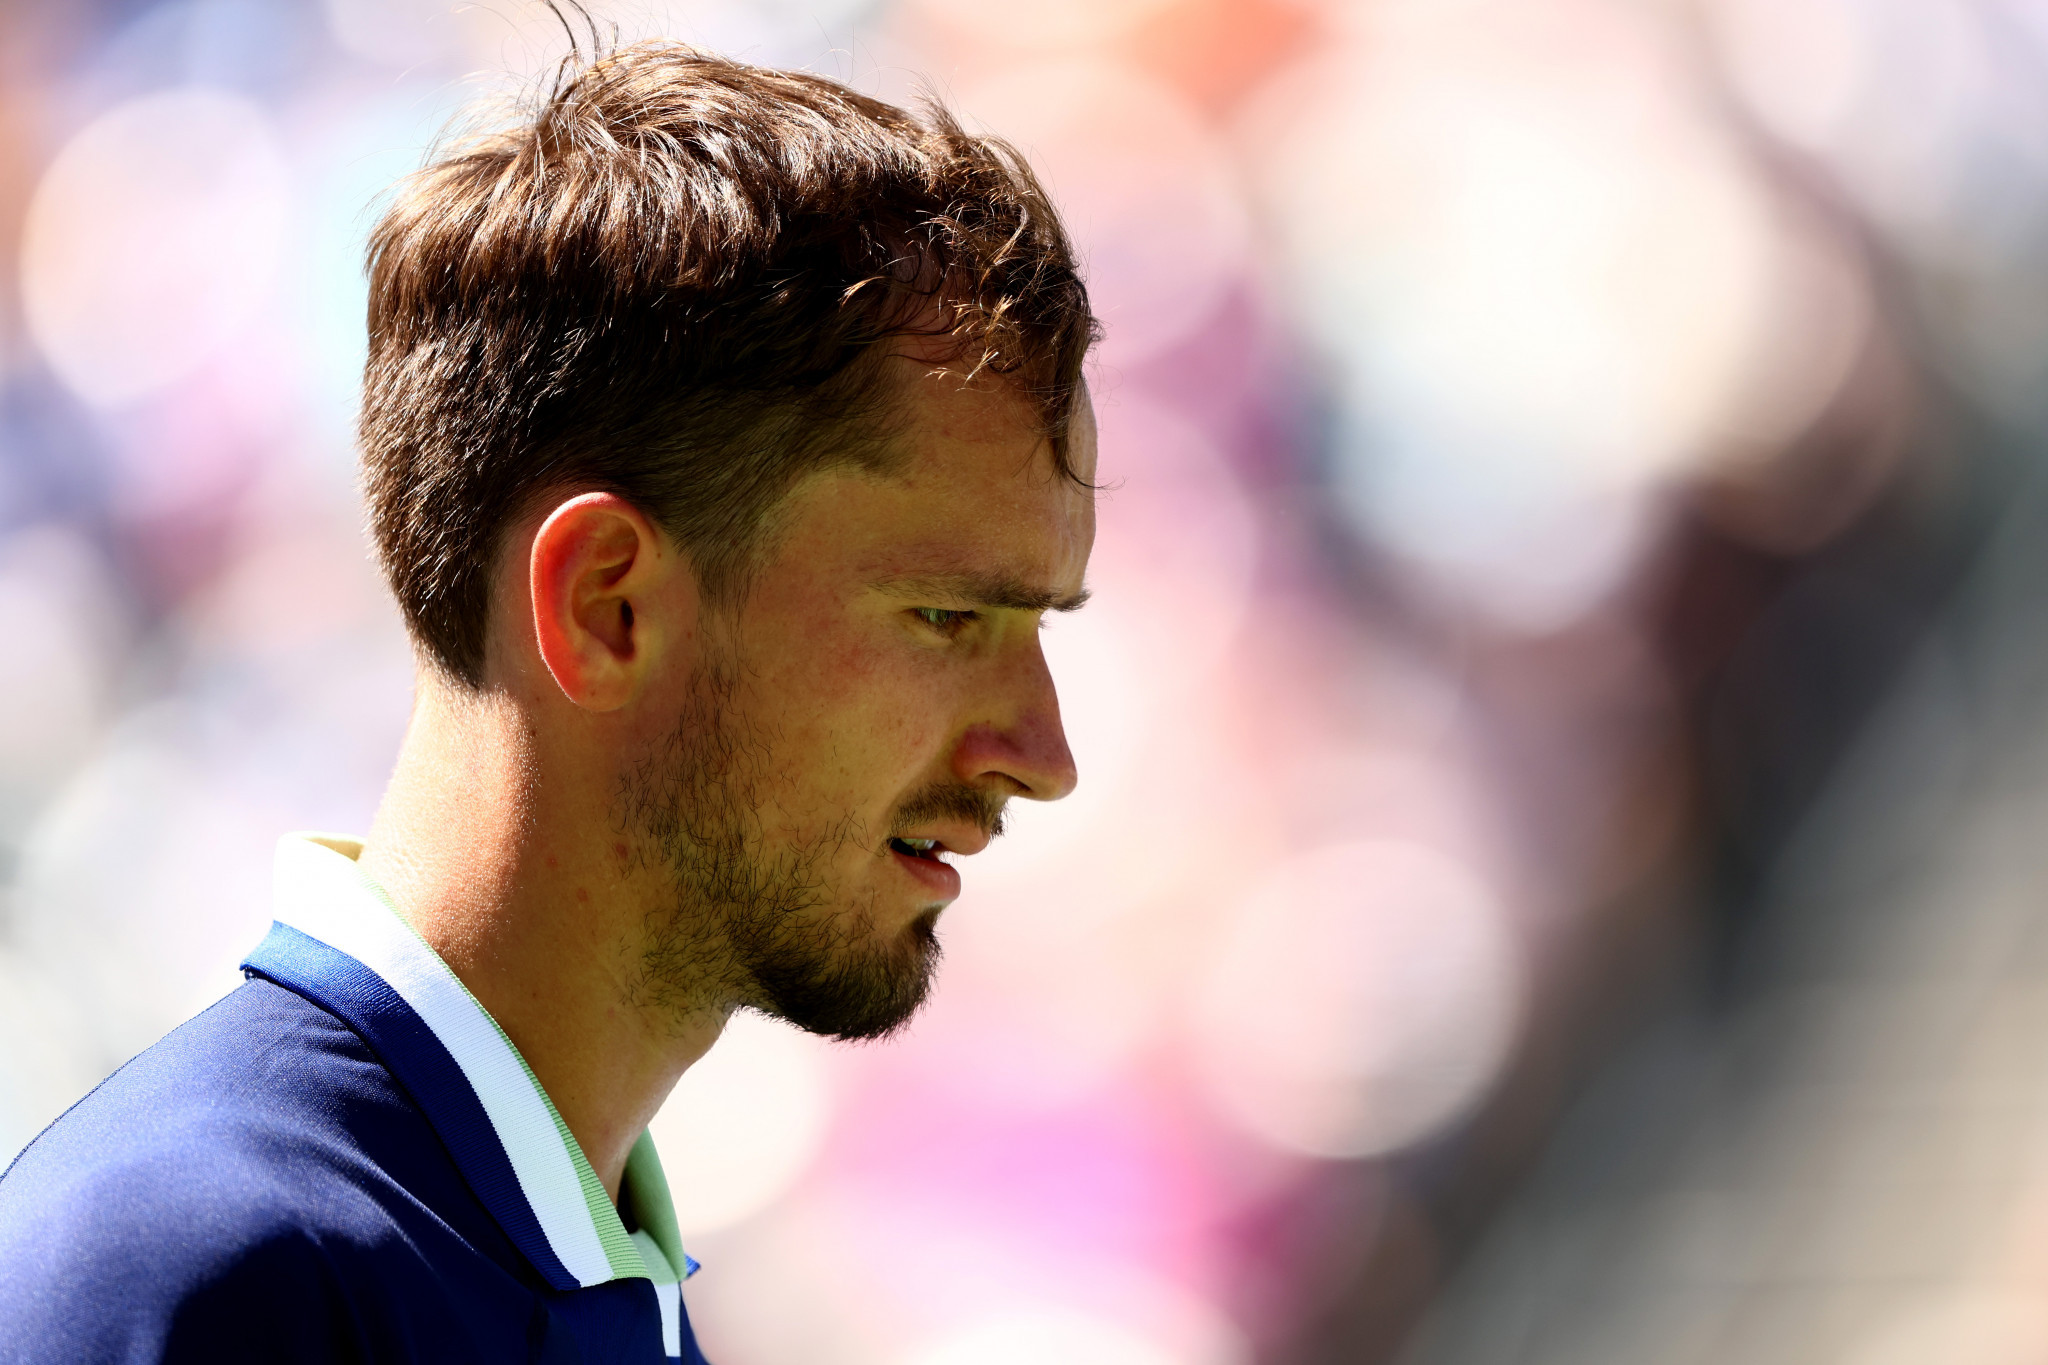 Daniil Medvedev is one of the high-profile players who will be unable to attend Wimbledon ©Getty Images